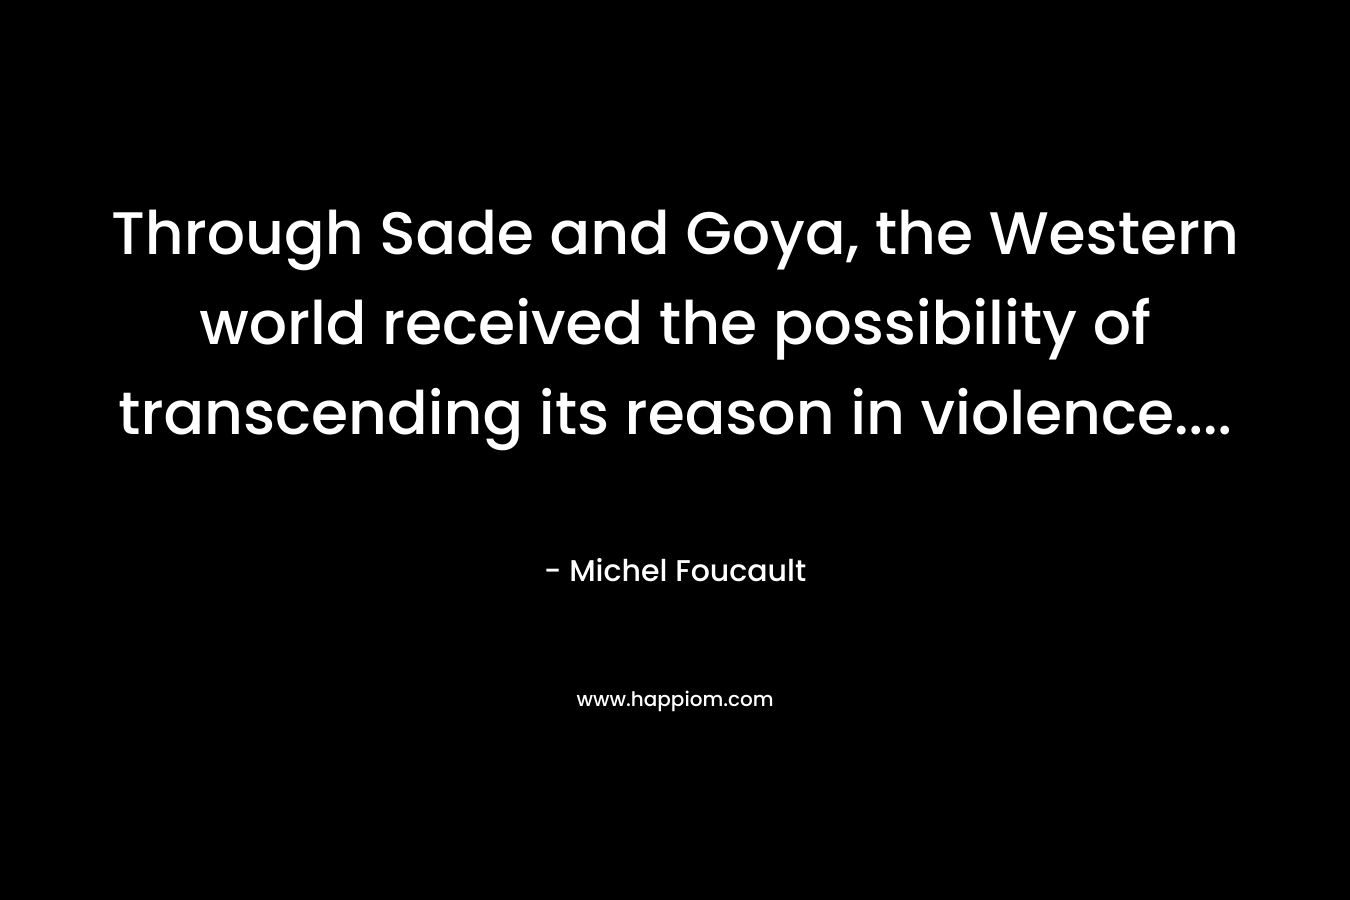 Through Sade and Goya, the Western world received the possibility of transcending its reason in violence…. – Michel Foucault